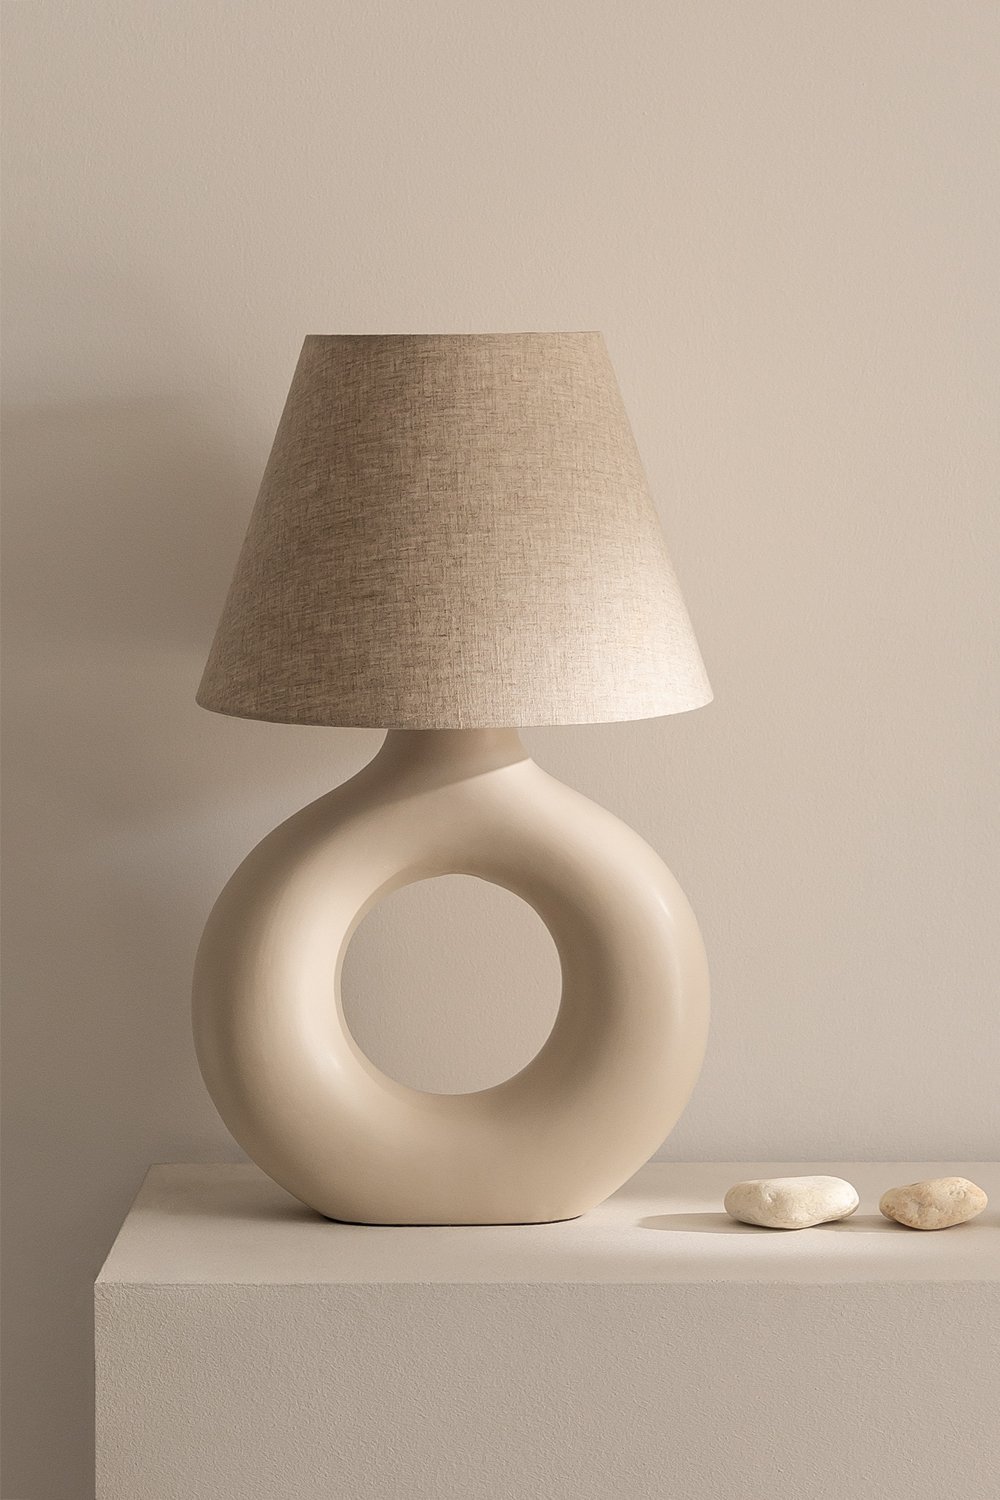 Foltest ceramic table lamp, gallery image 1